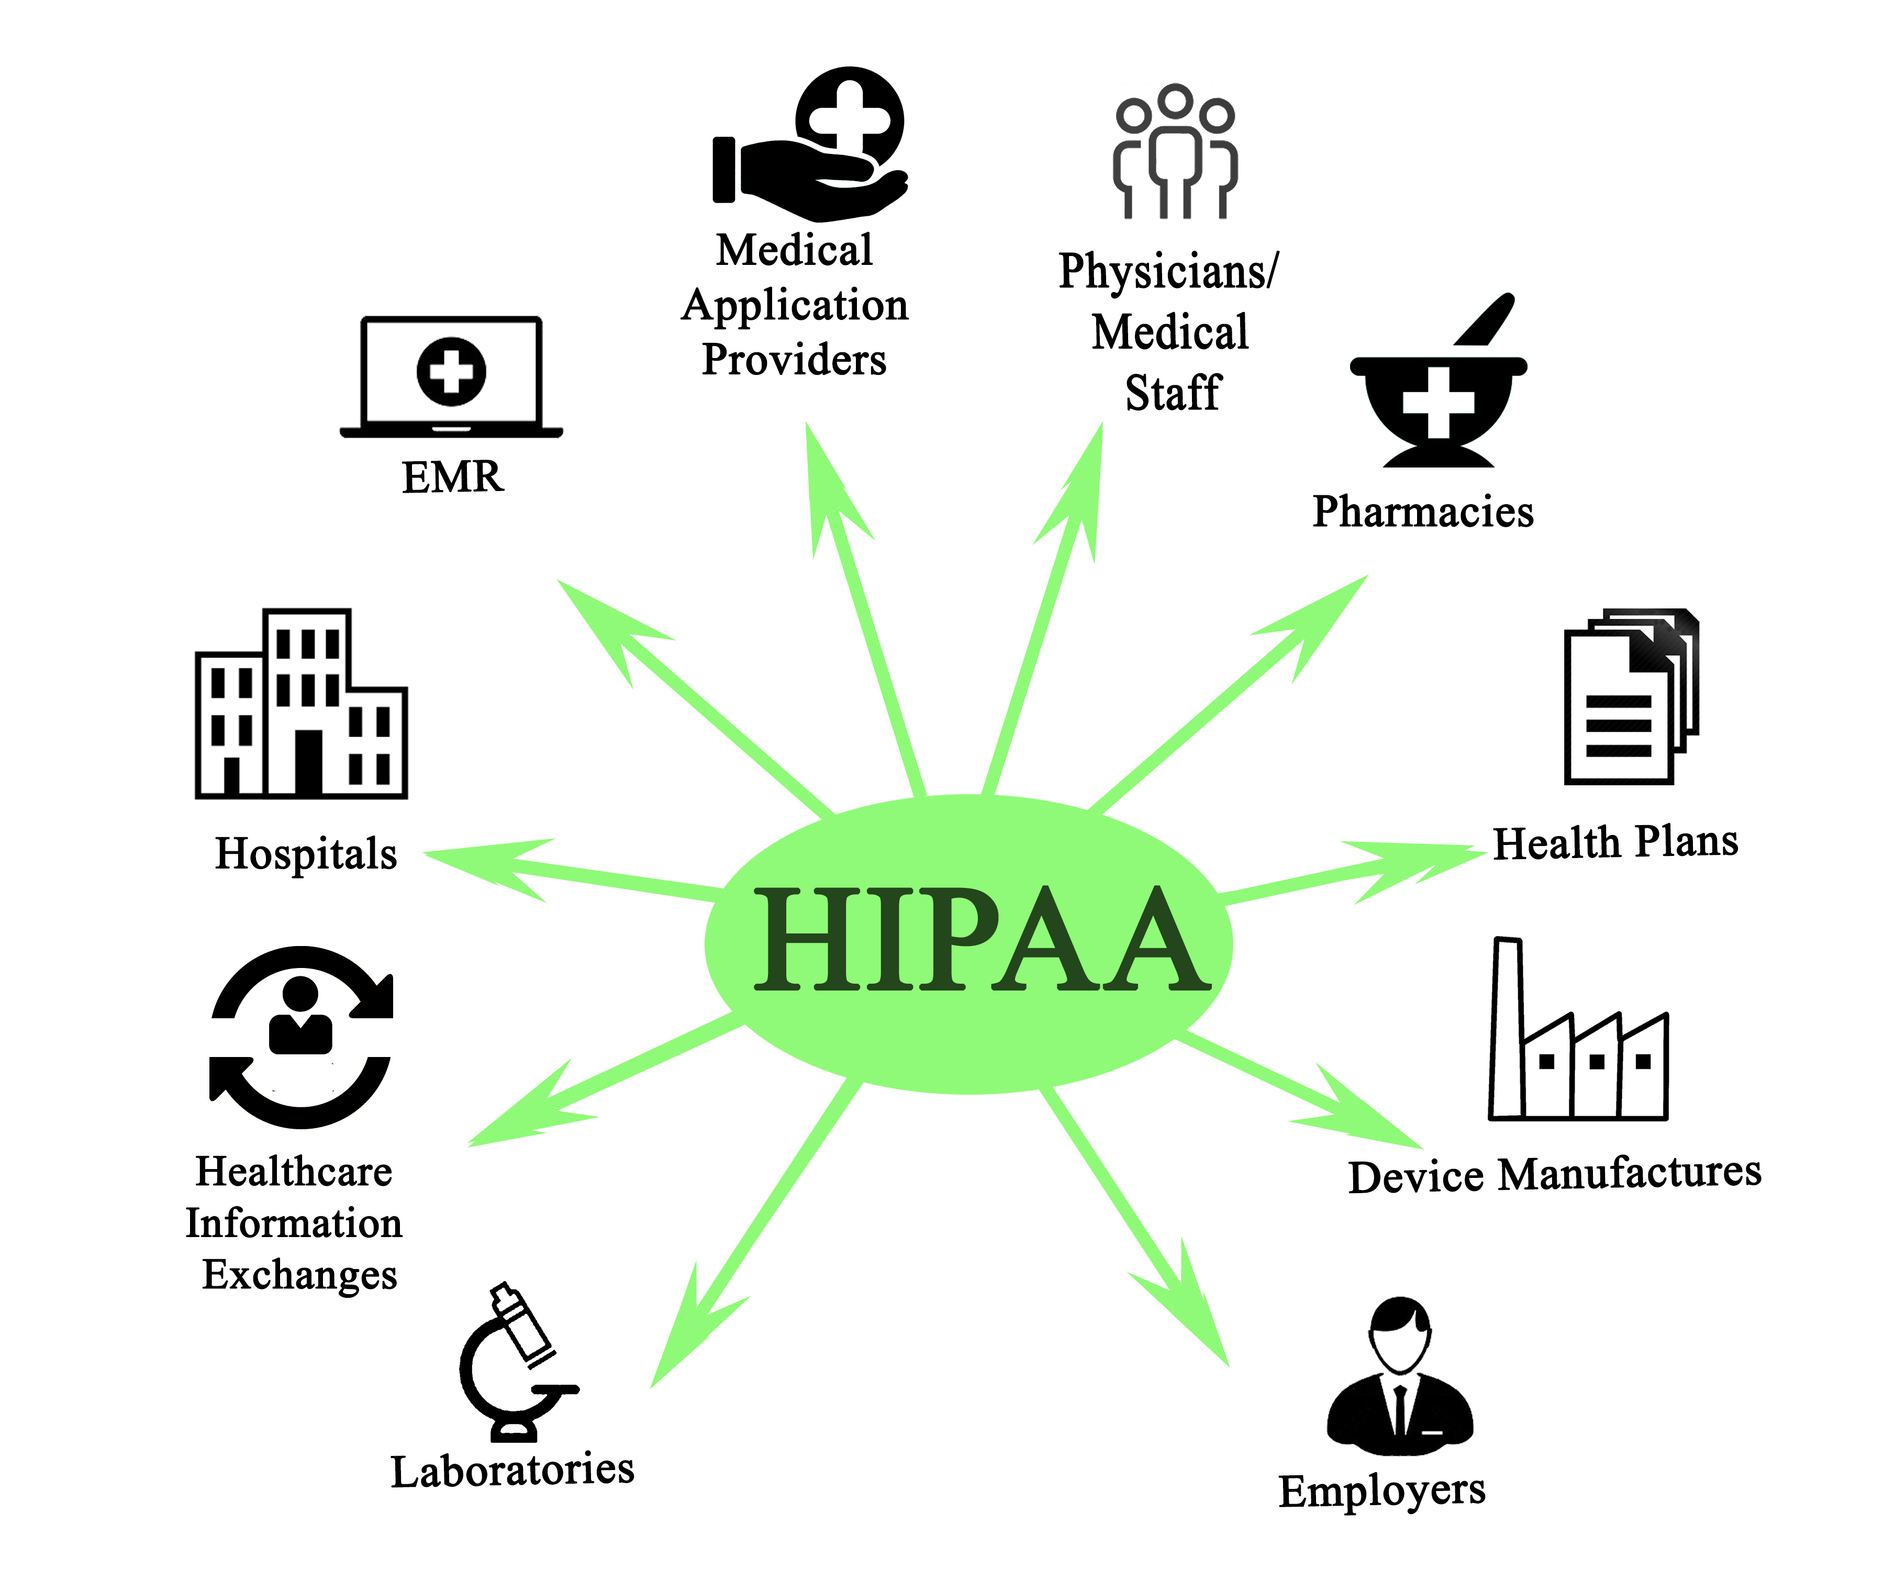  Penetration Testing provides the technical evaluation of security controls for HIPAA compliance 